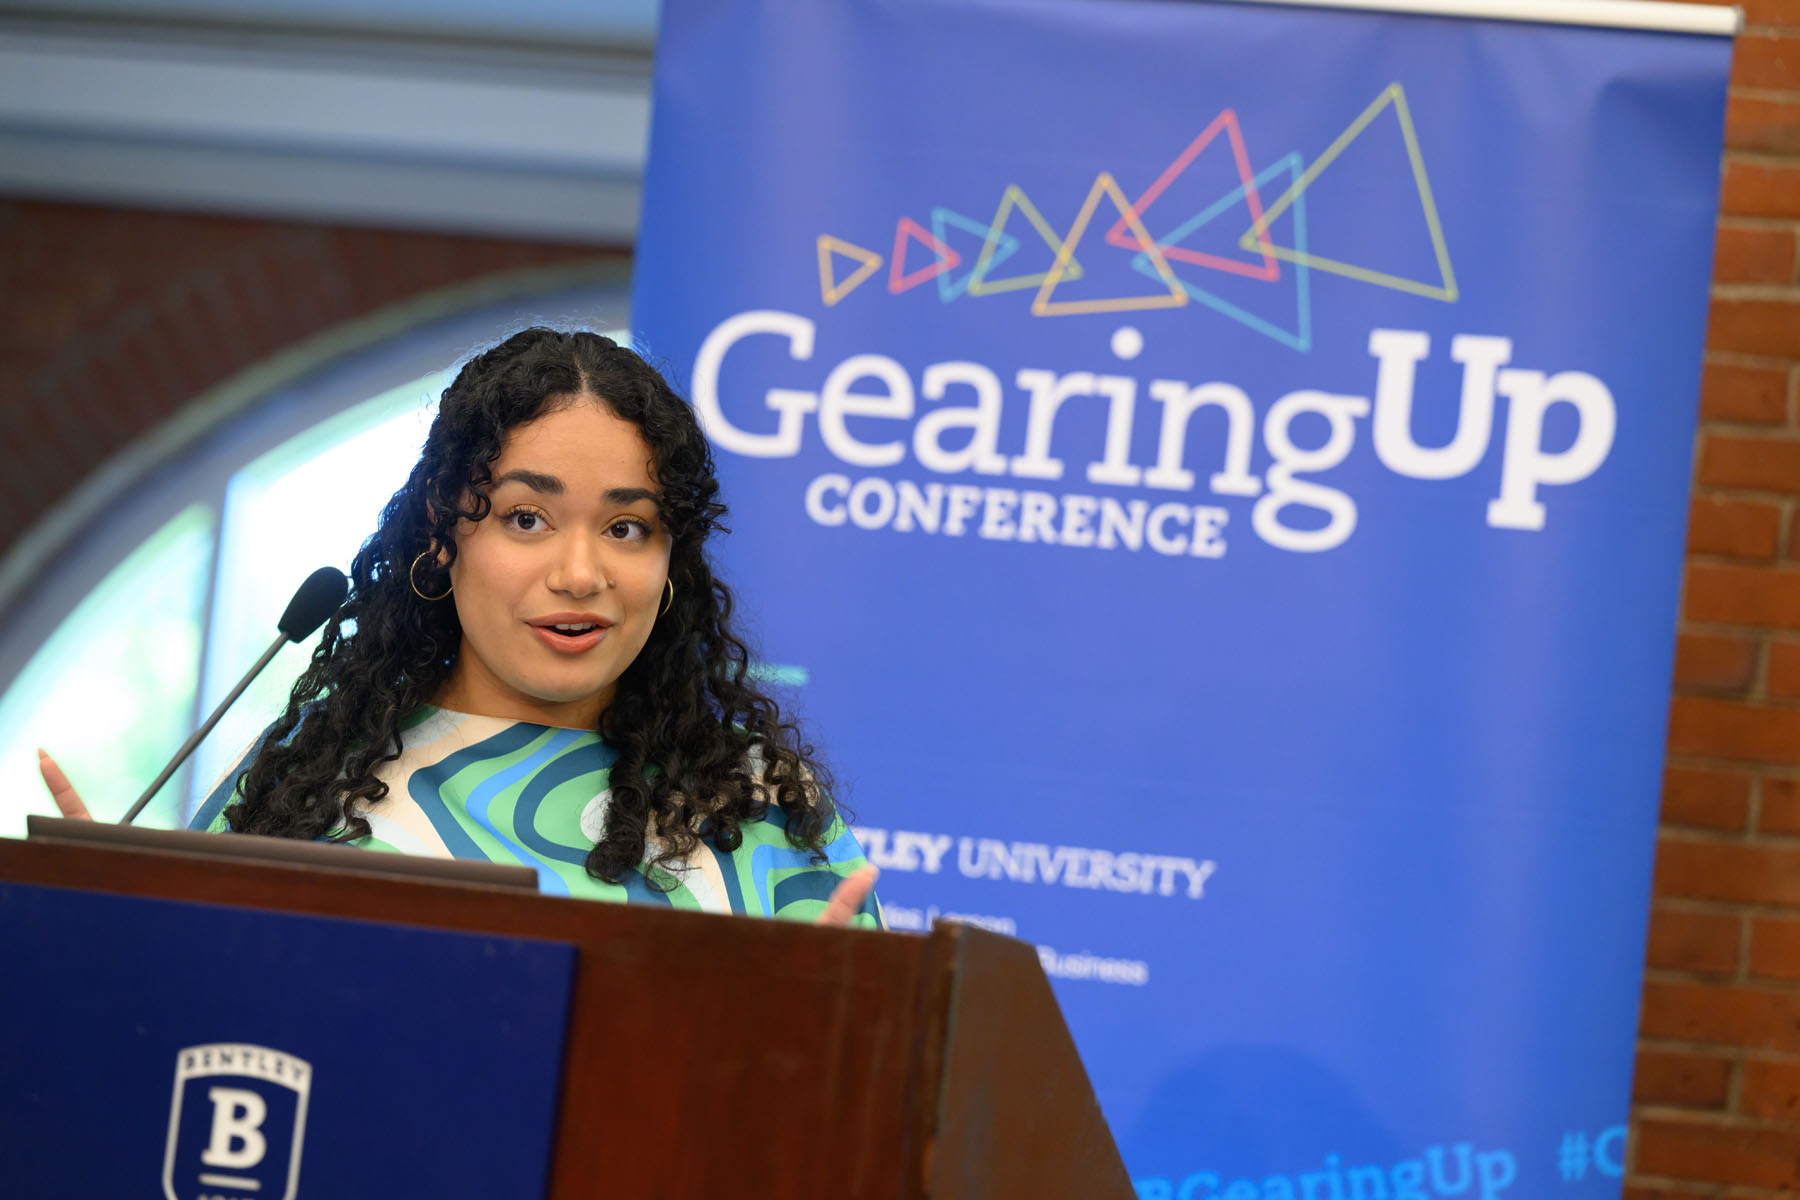 Bentley University student Kary De Jesus speaks at the Gearing Up Conference hosted by the Center for Women and Business at Bentley